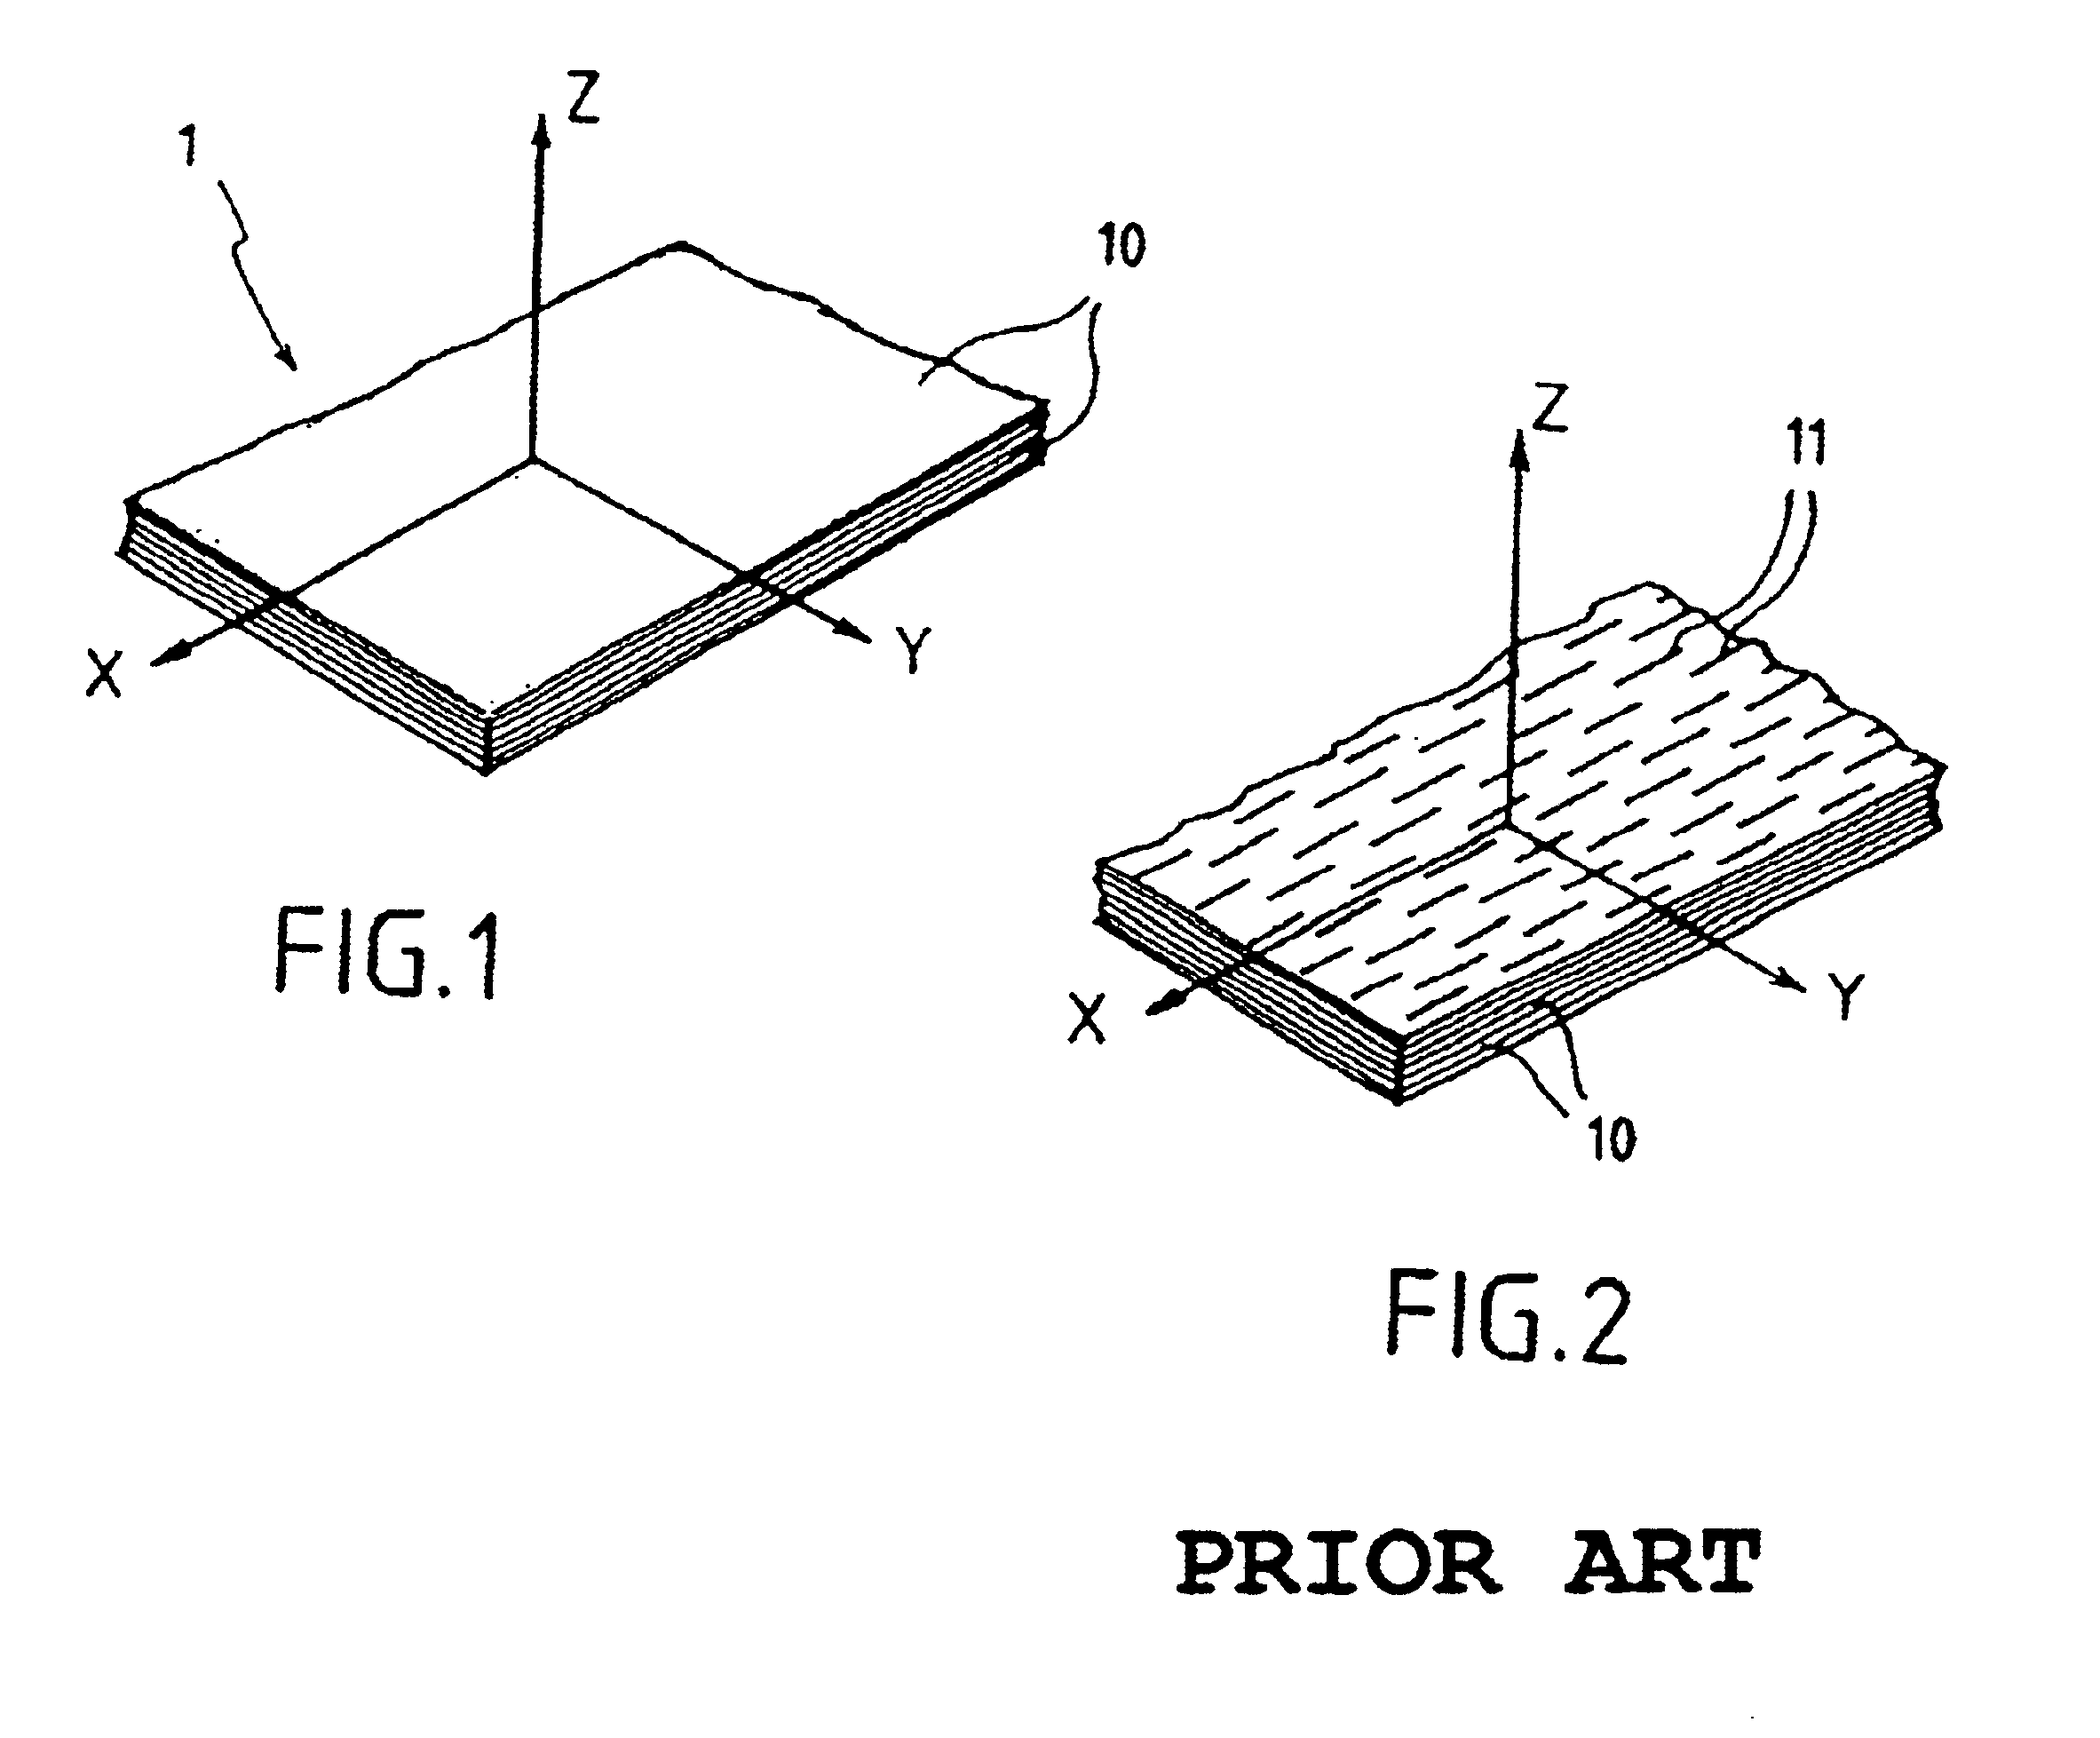 Method of manufacturing honeycomb structures